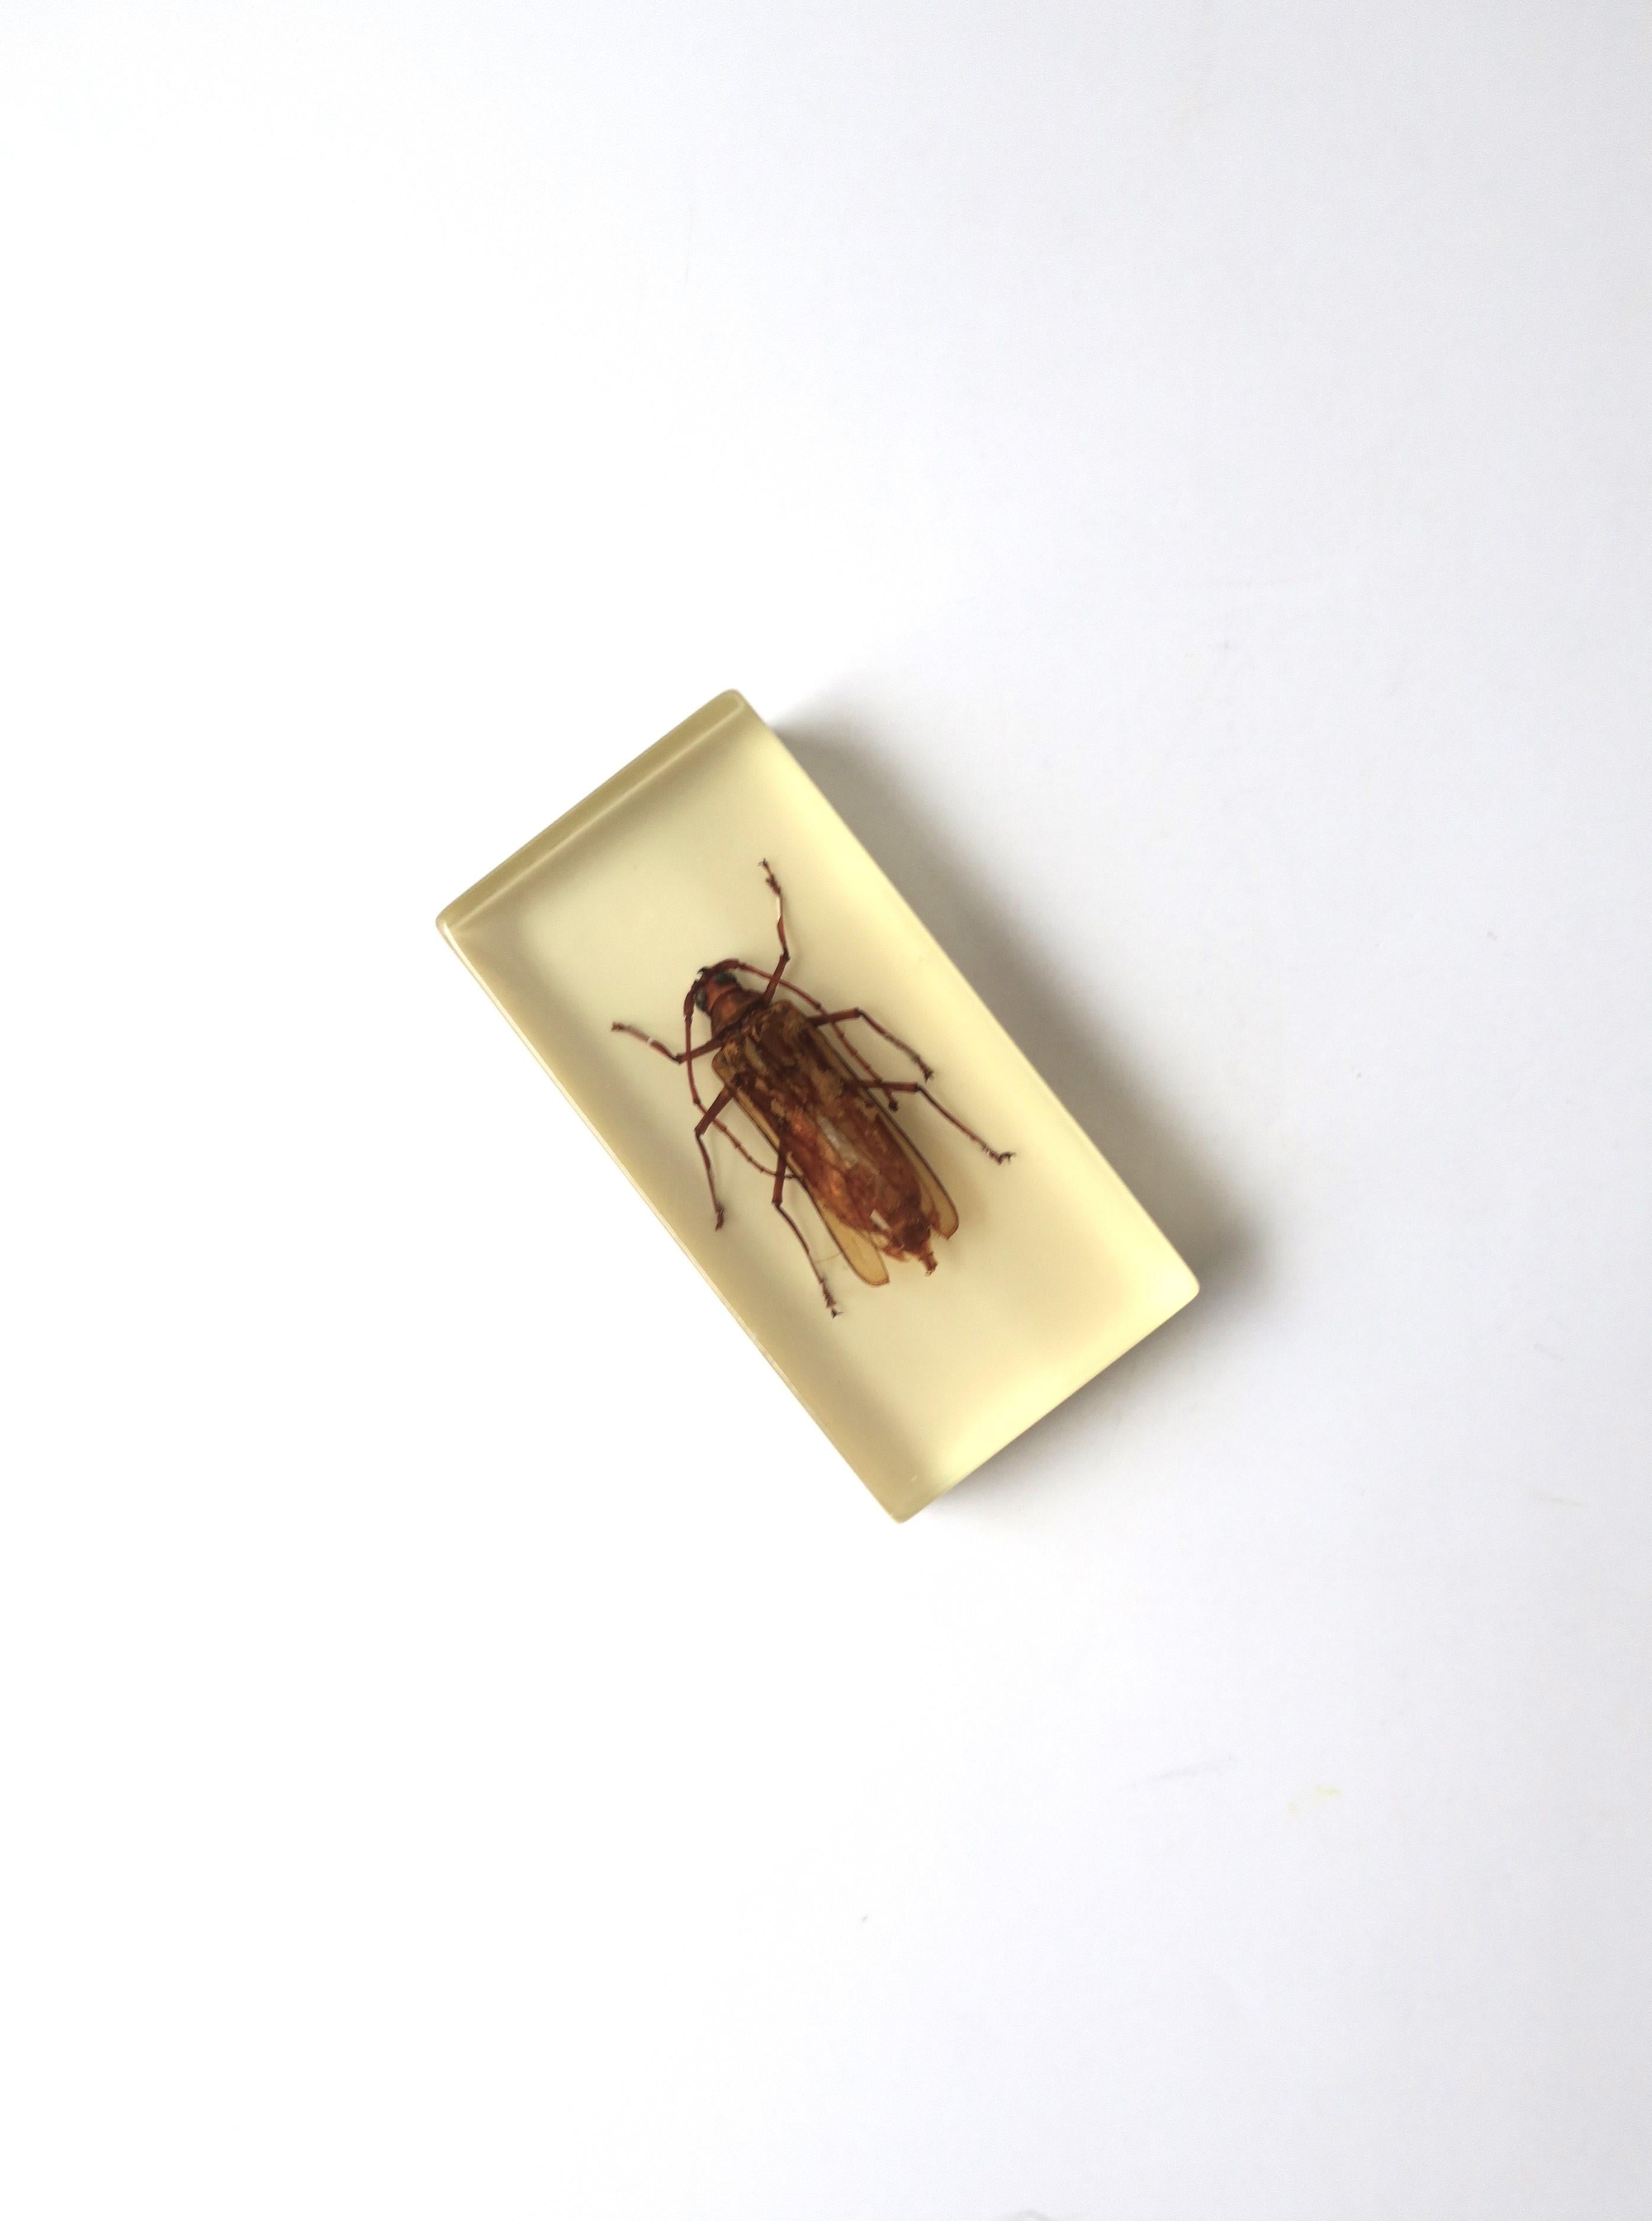 Victorian Lucite Encased Insect Bug Decorative Object or Paperweight For Sale